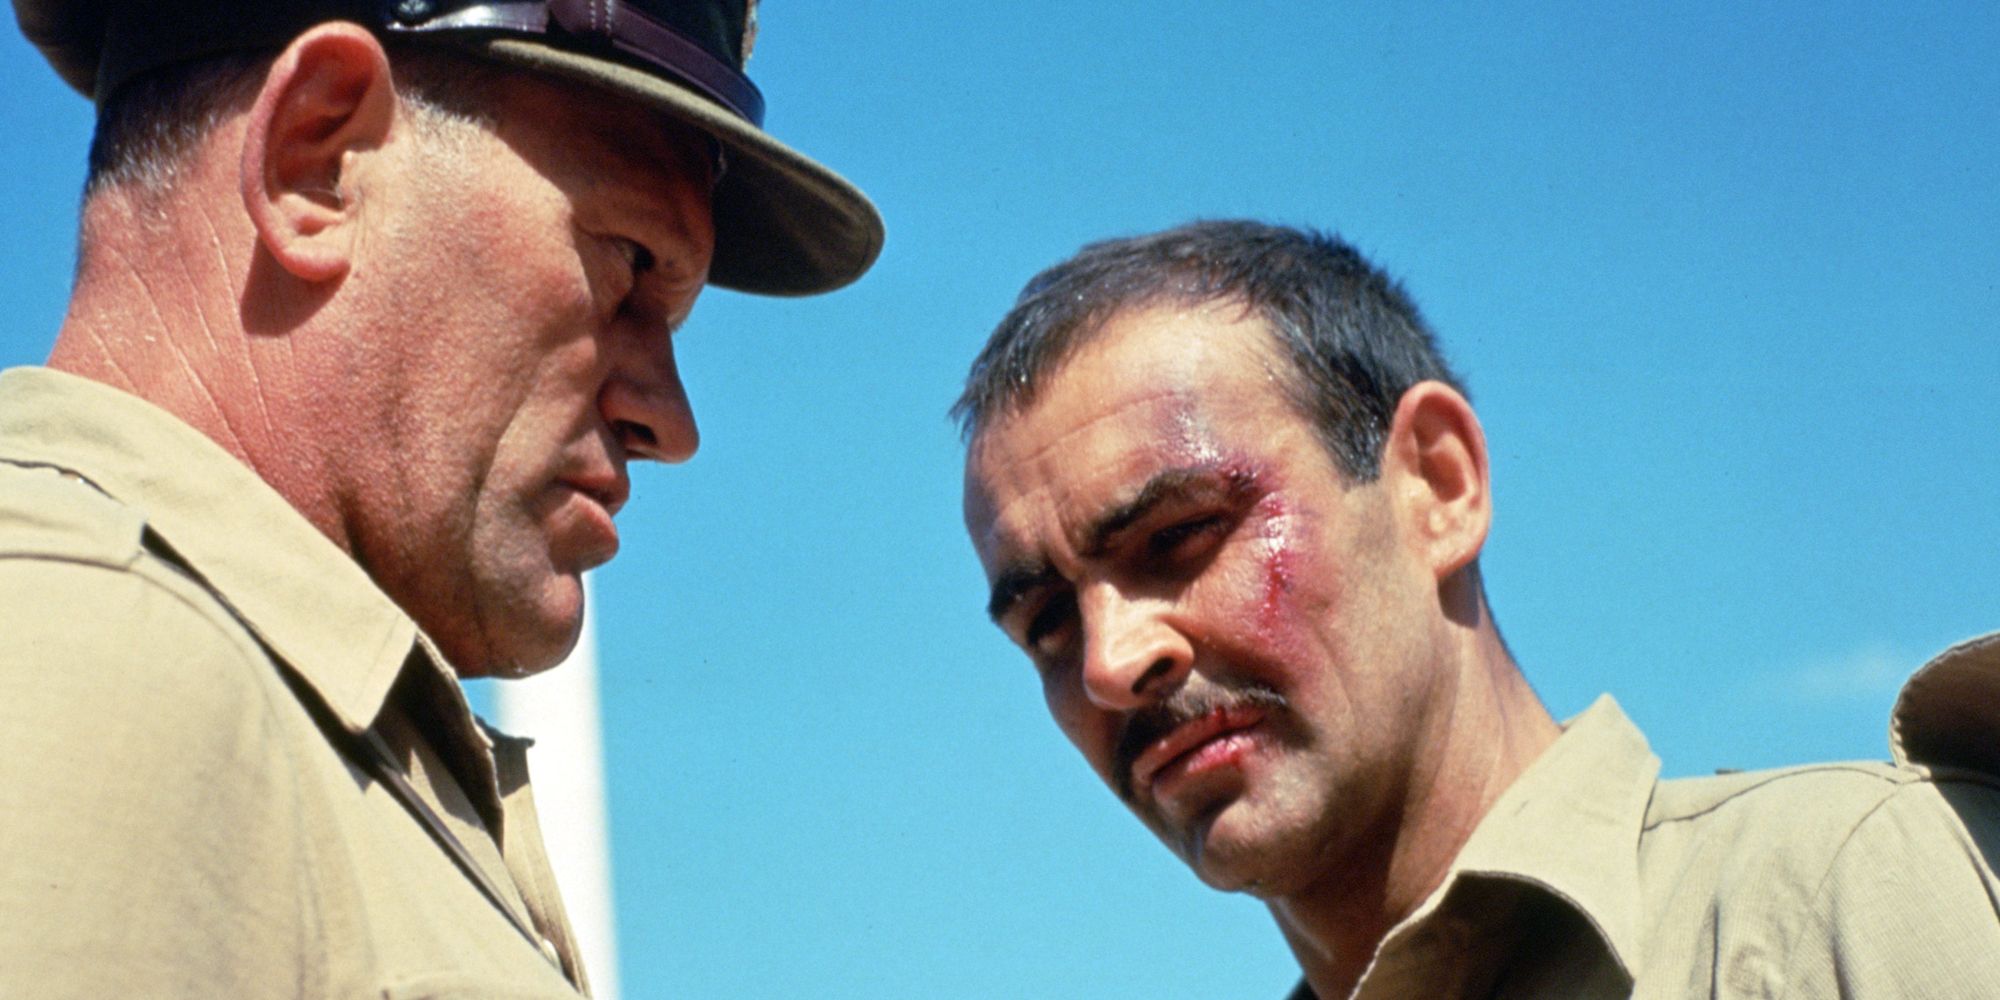 Sean Connery as Joe Roberts looking down while being adressed by another man in The Hill